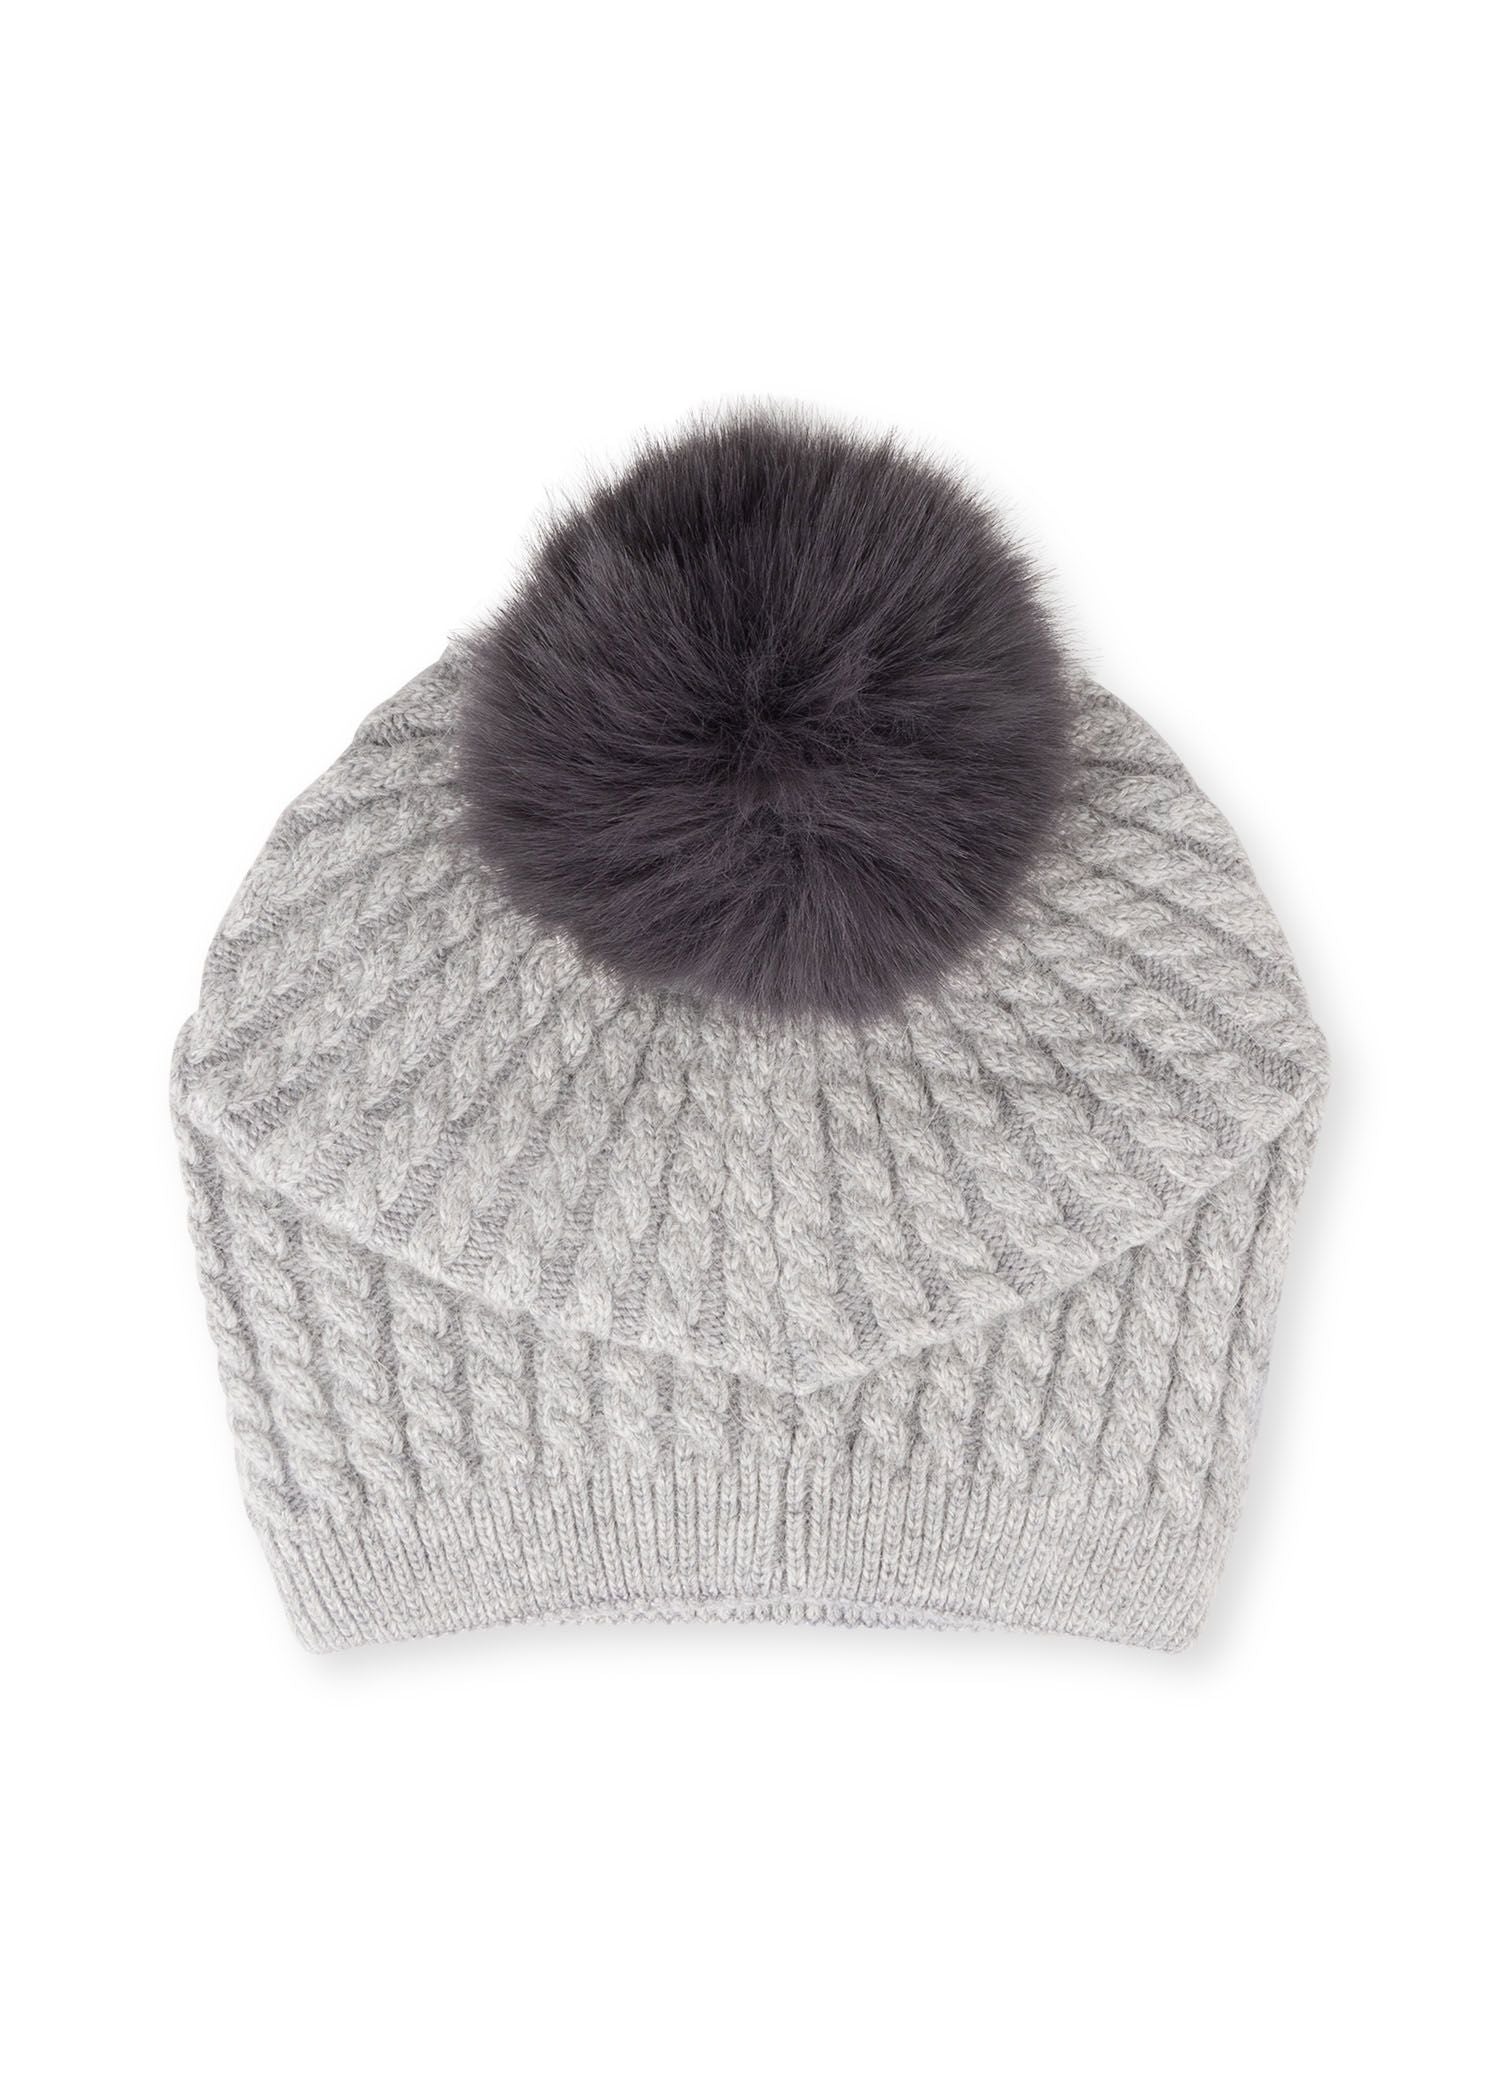 cabin cable hat heather